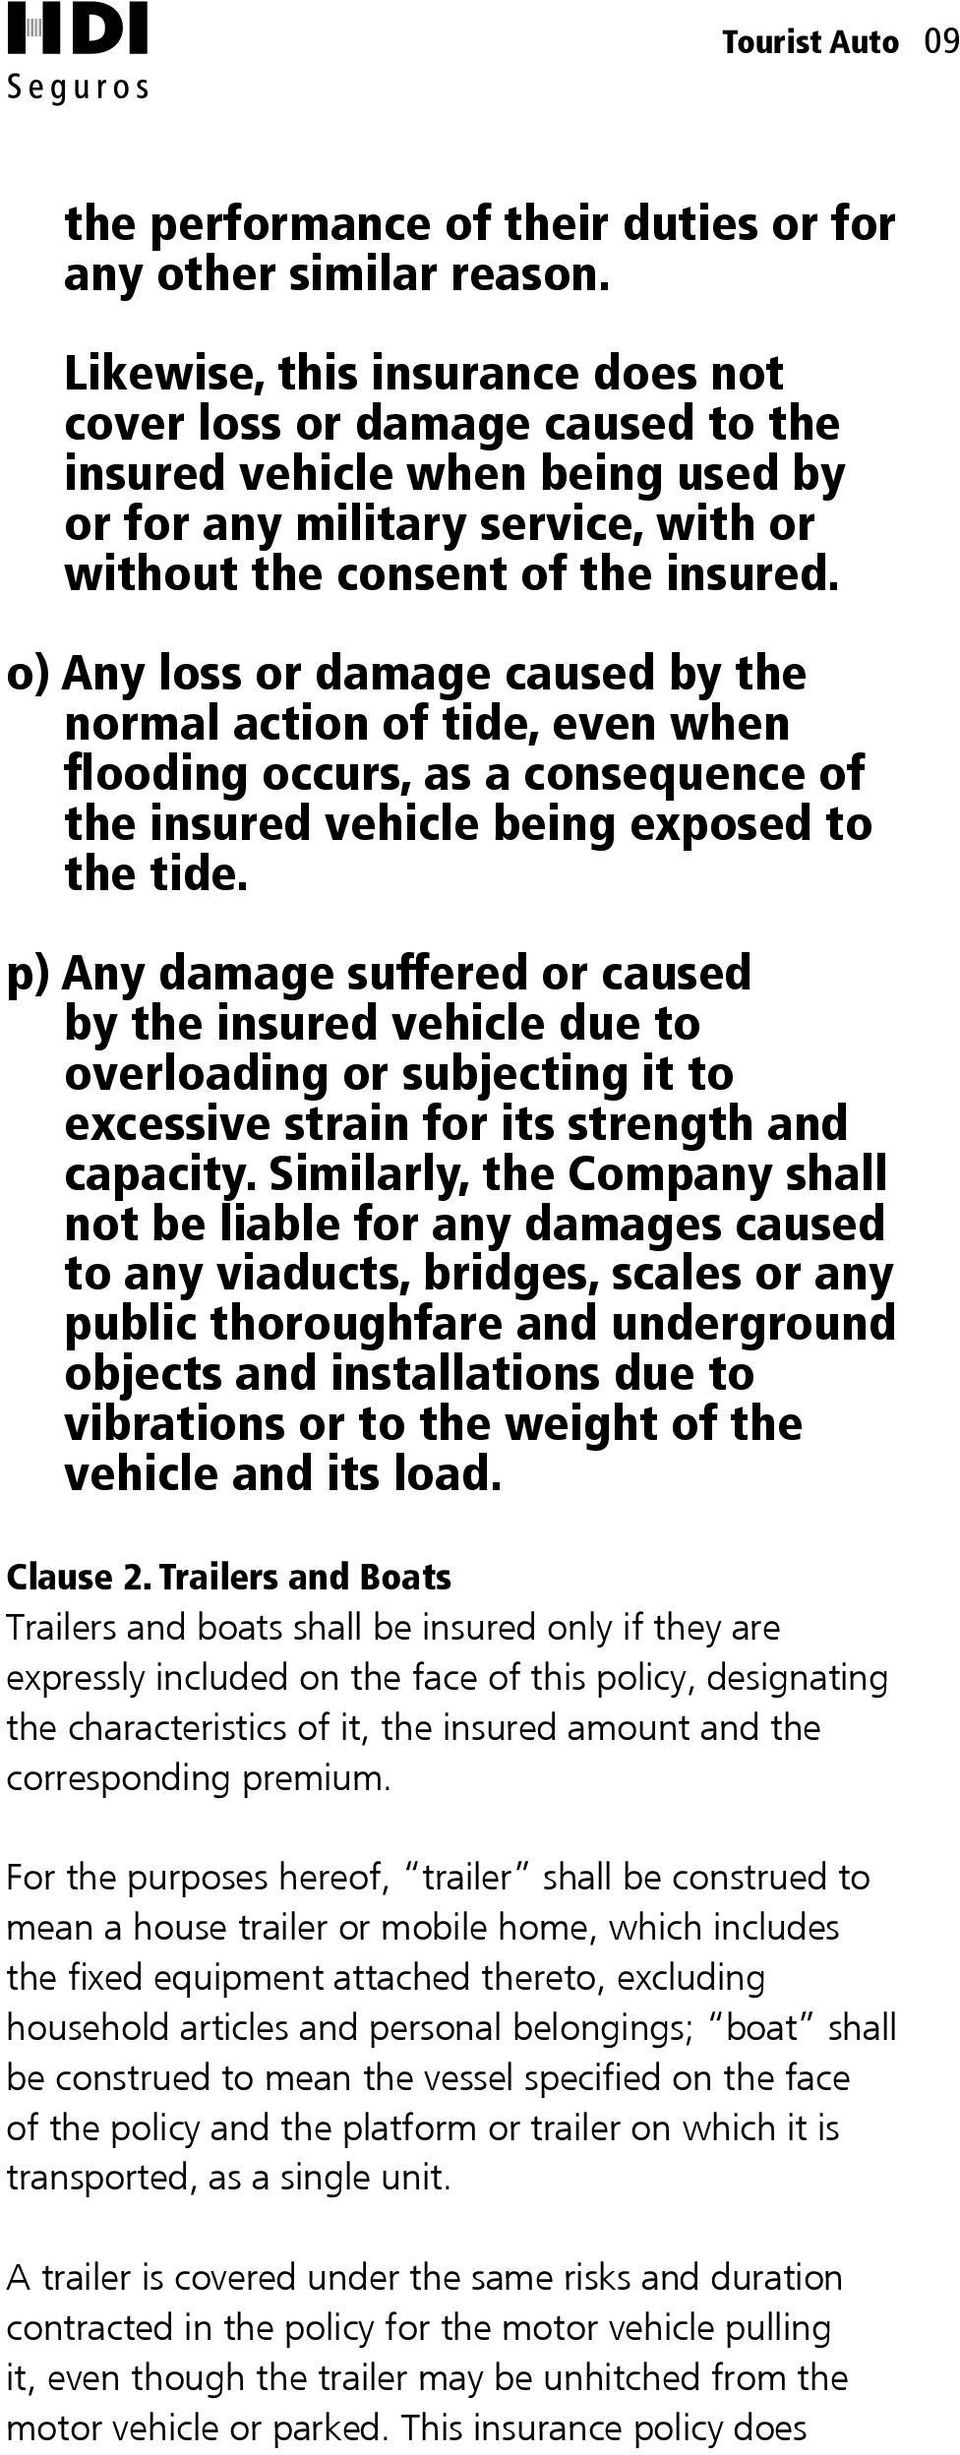 o) Any loss or damage caused by the normal action of tide, even when flooding occurs, as a consequence of the insured vehicle being exposed to the tide.